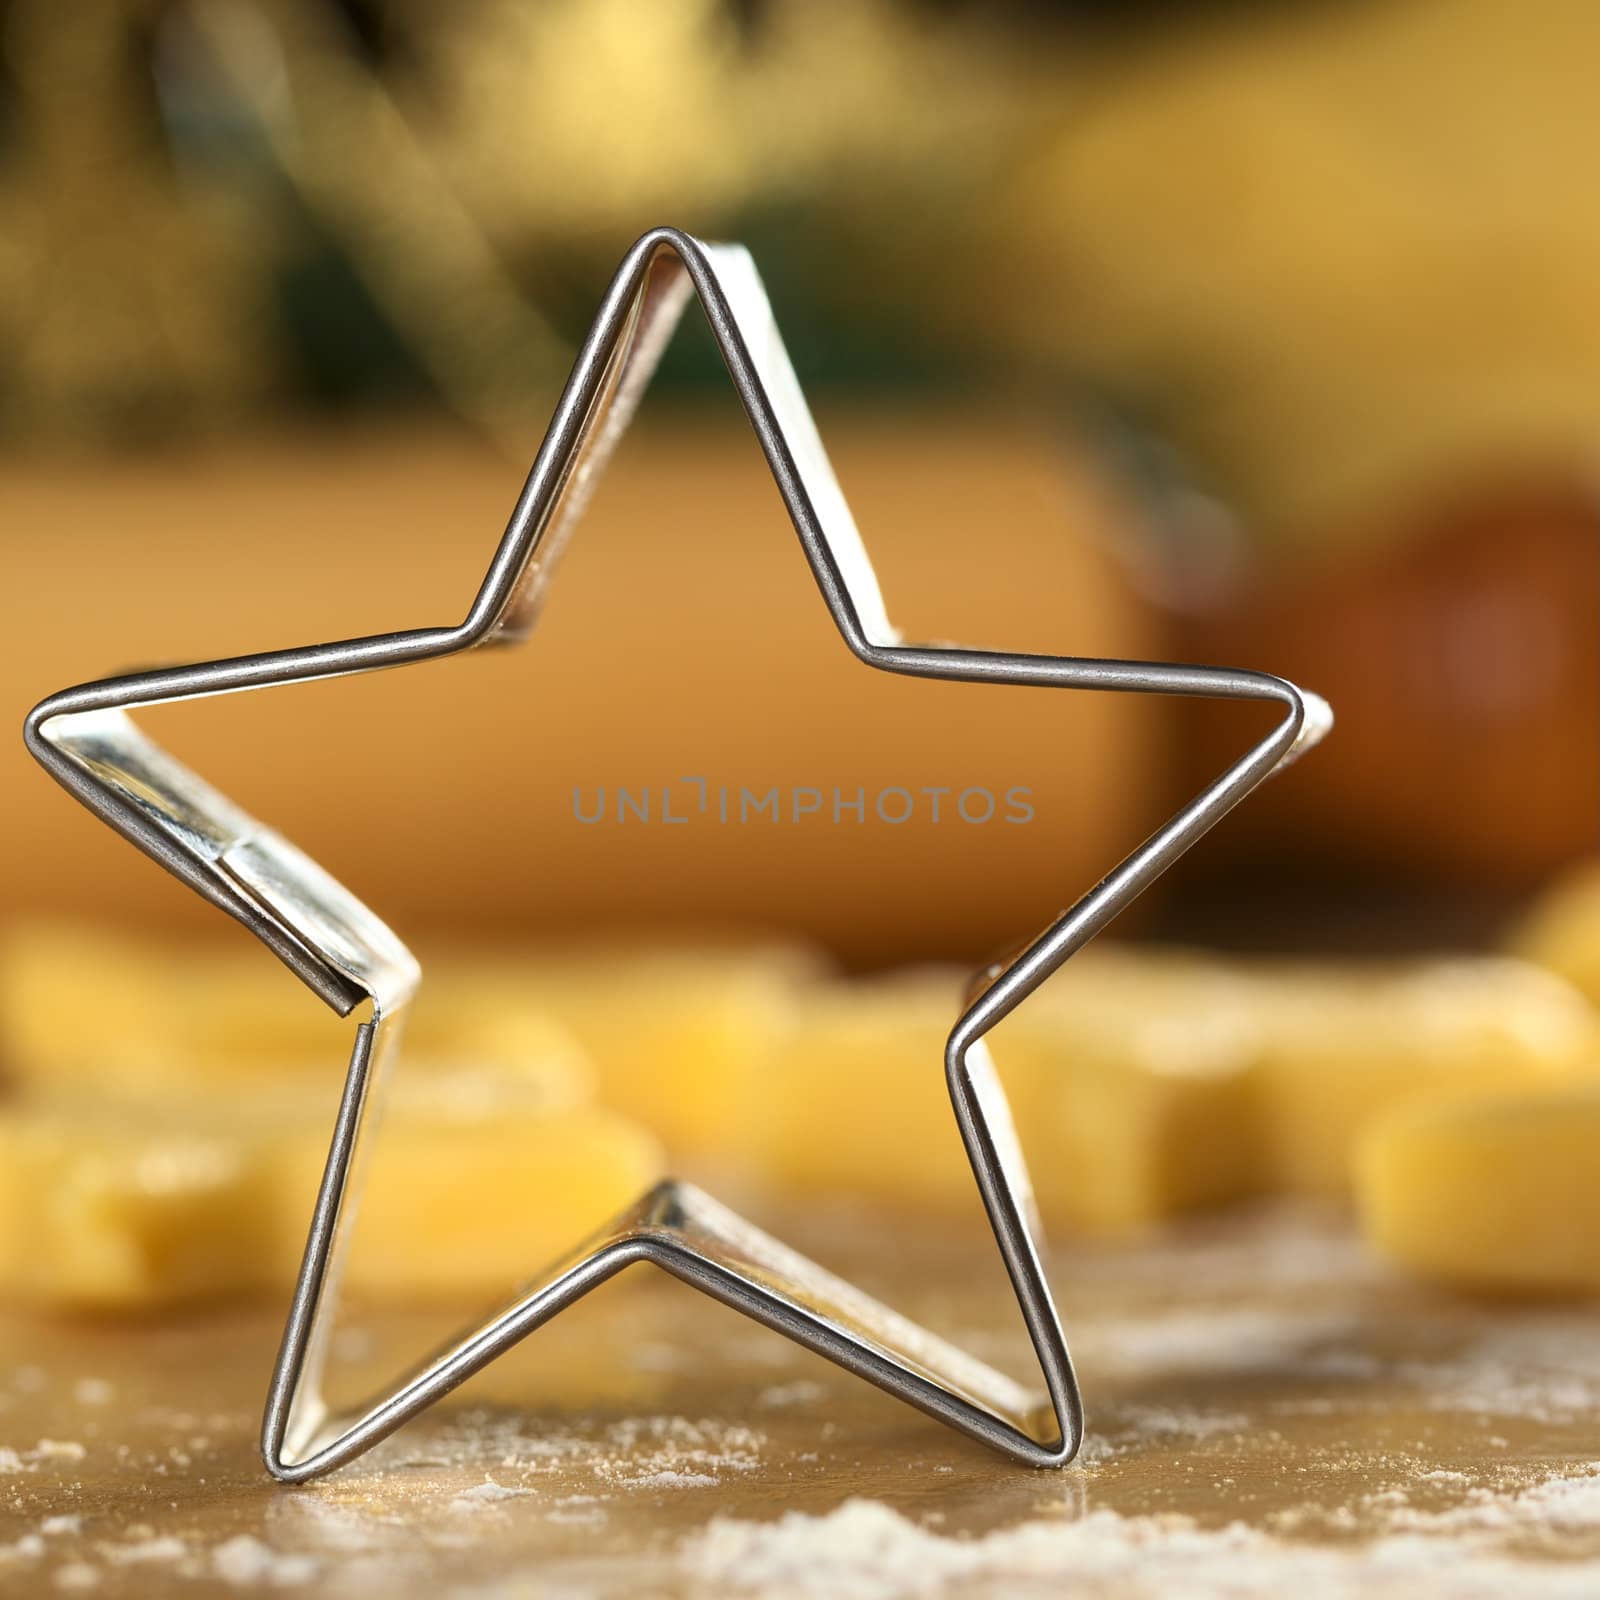 Star-Shaped Cookie Cutter by ildi